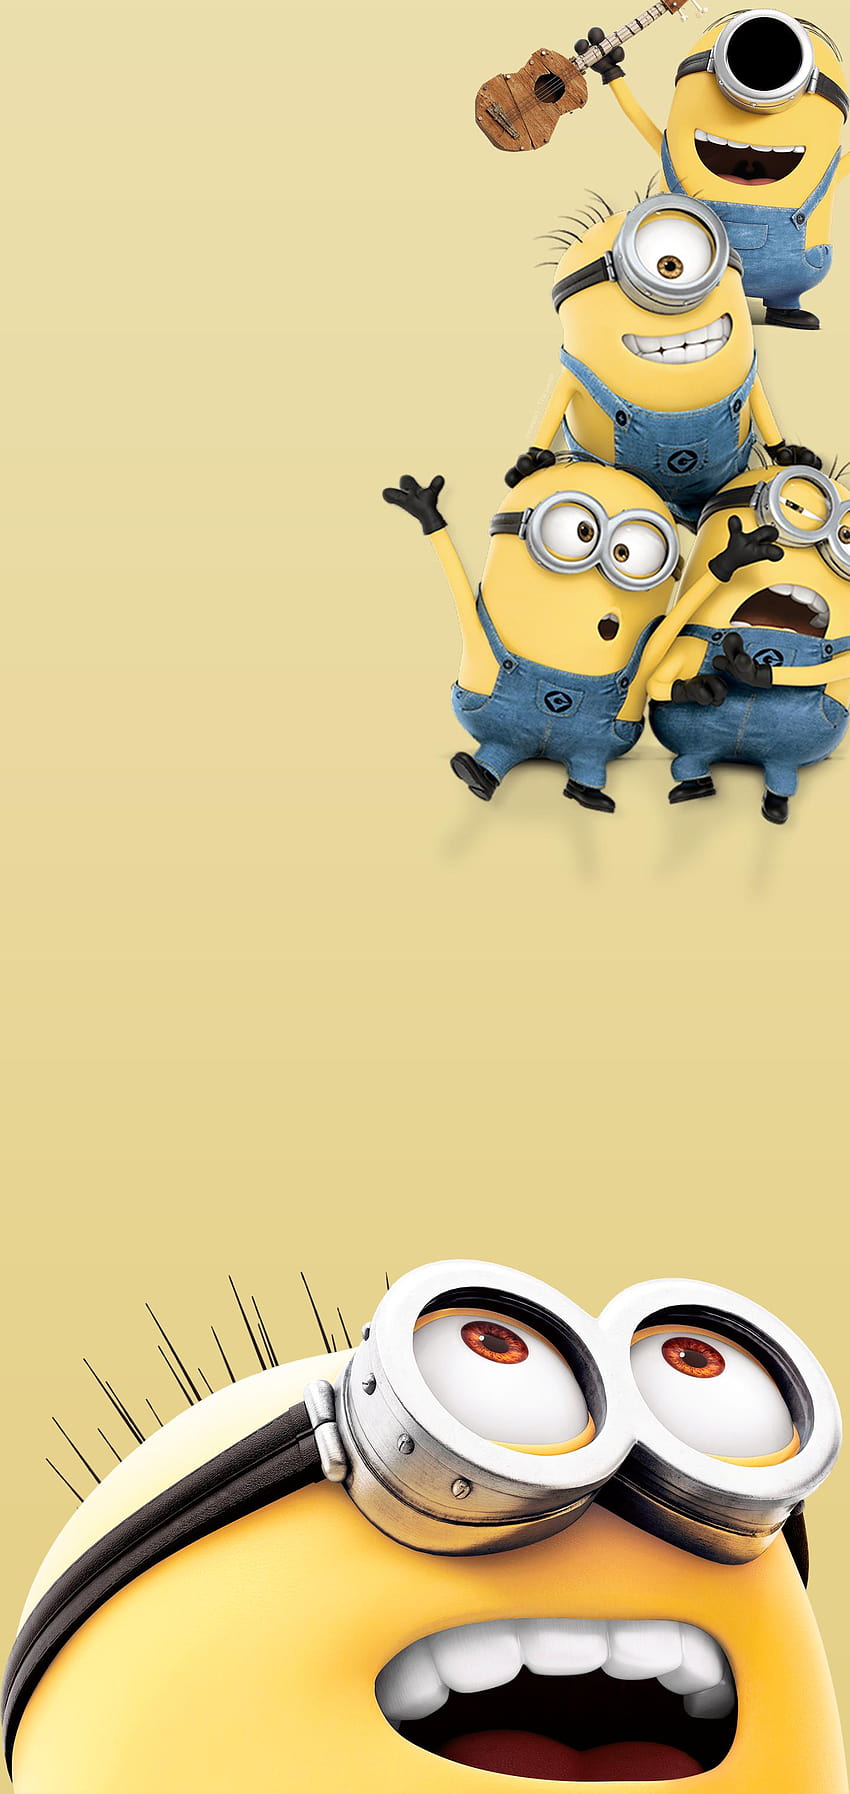 Band of Minions of Despicable Me by BlackBindy Galaxy S10 Hole ...